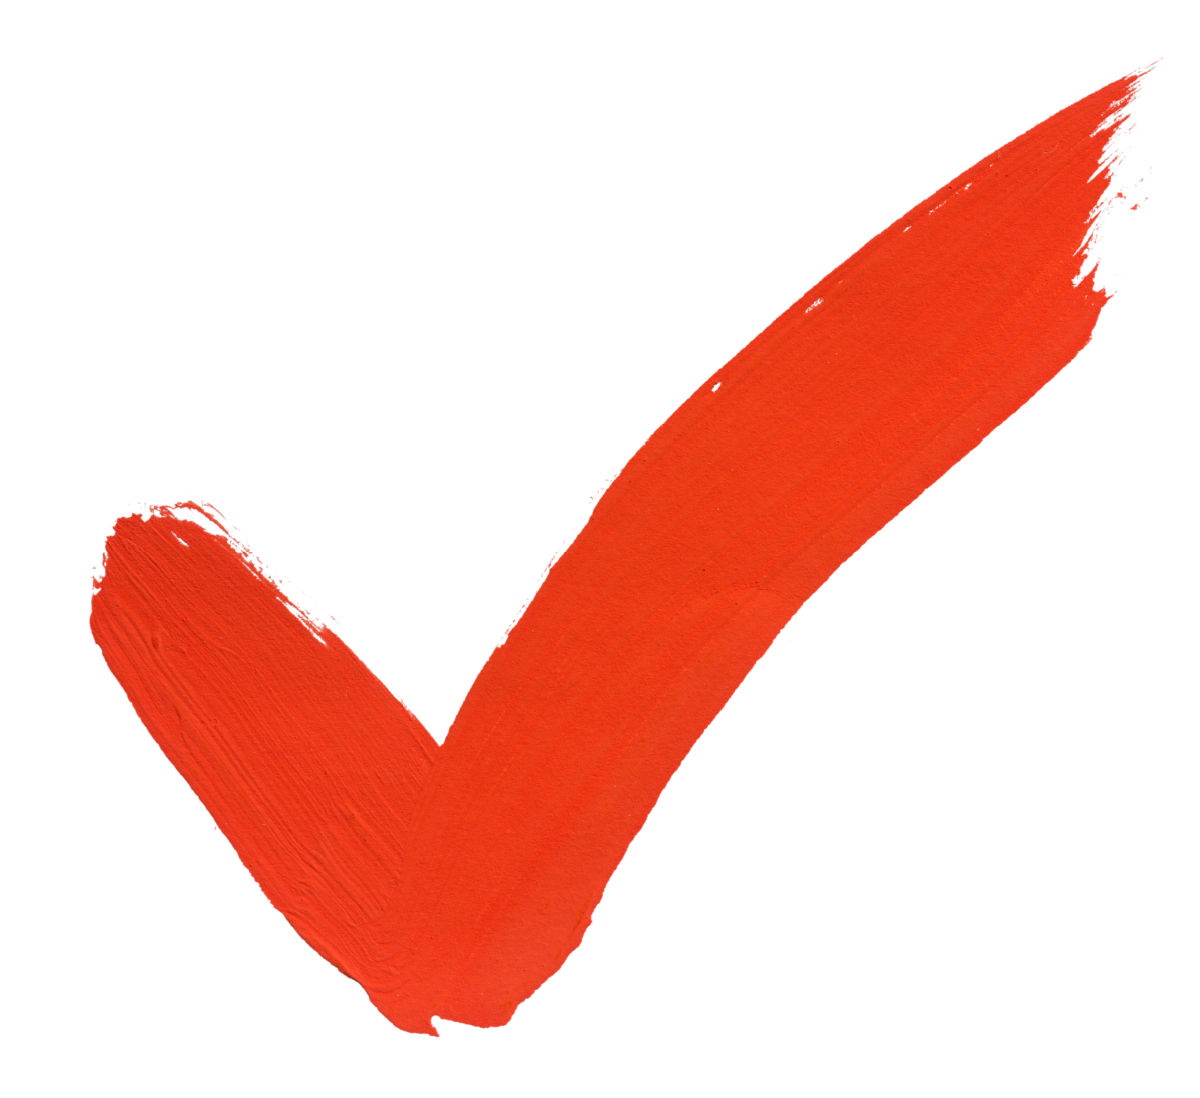 Red painted checkmark on white background